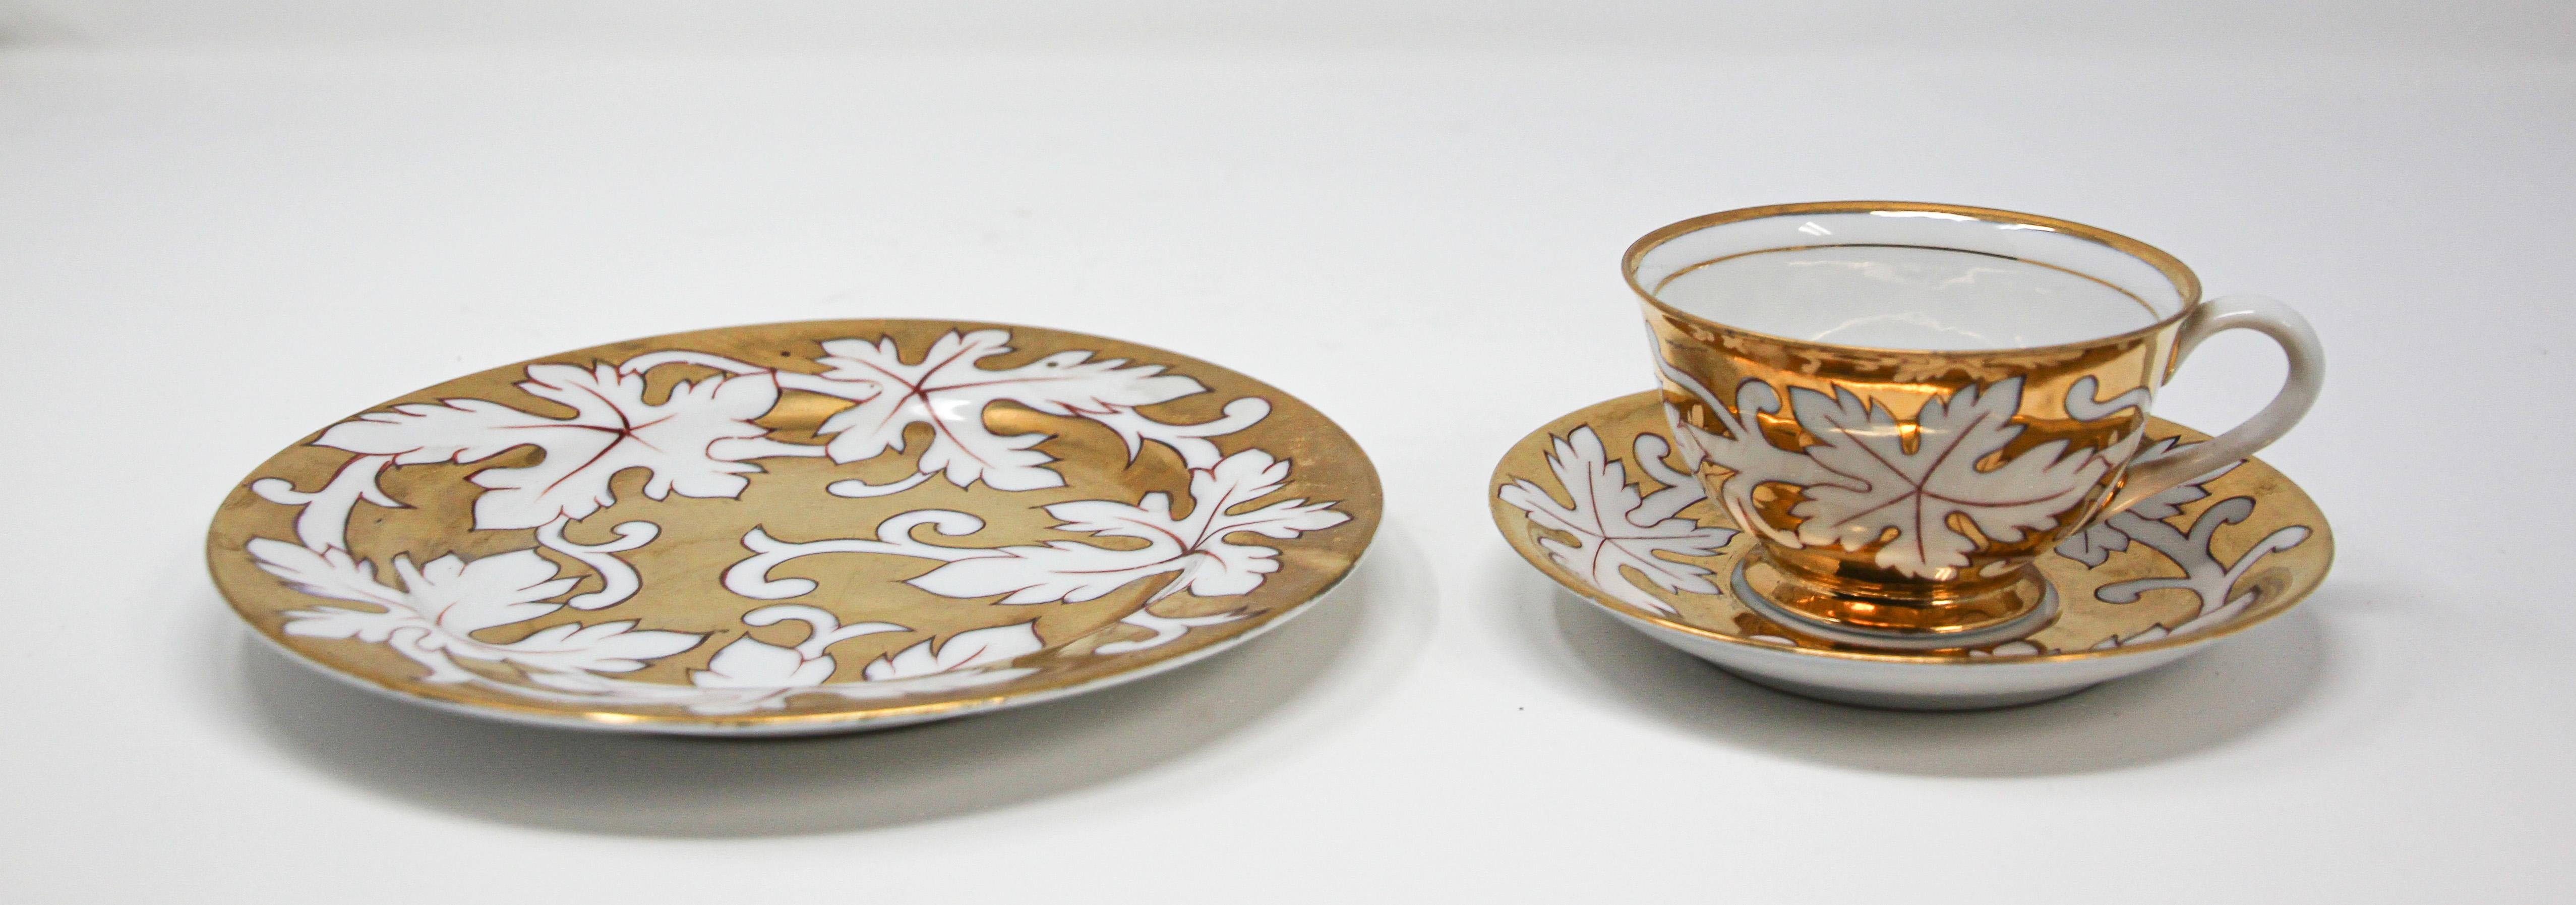 French Hand Painted Gilt Porcelain Tea, Coffee Cup with Desert Plate For Sale